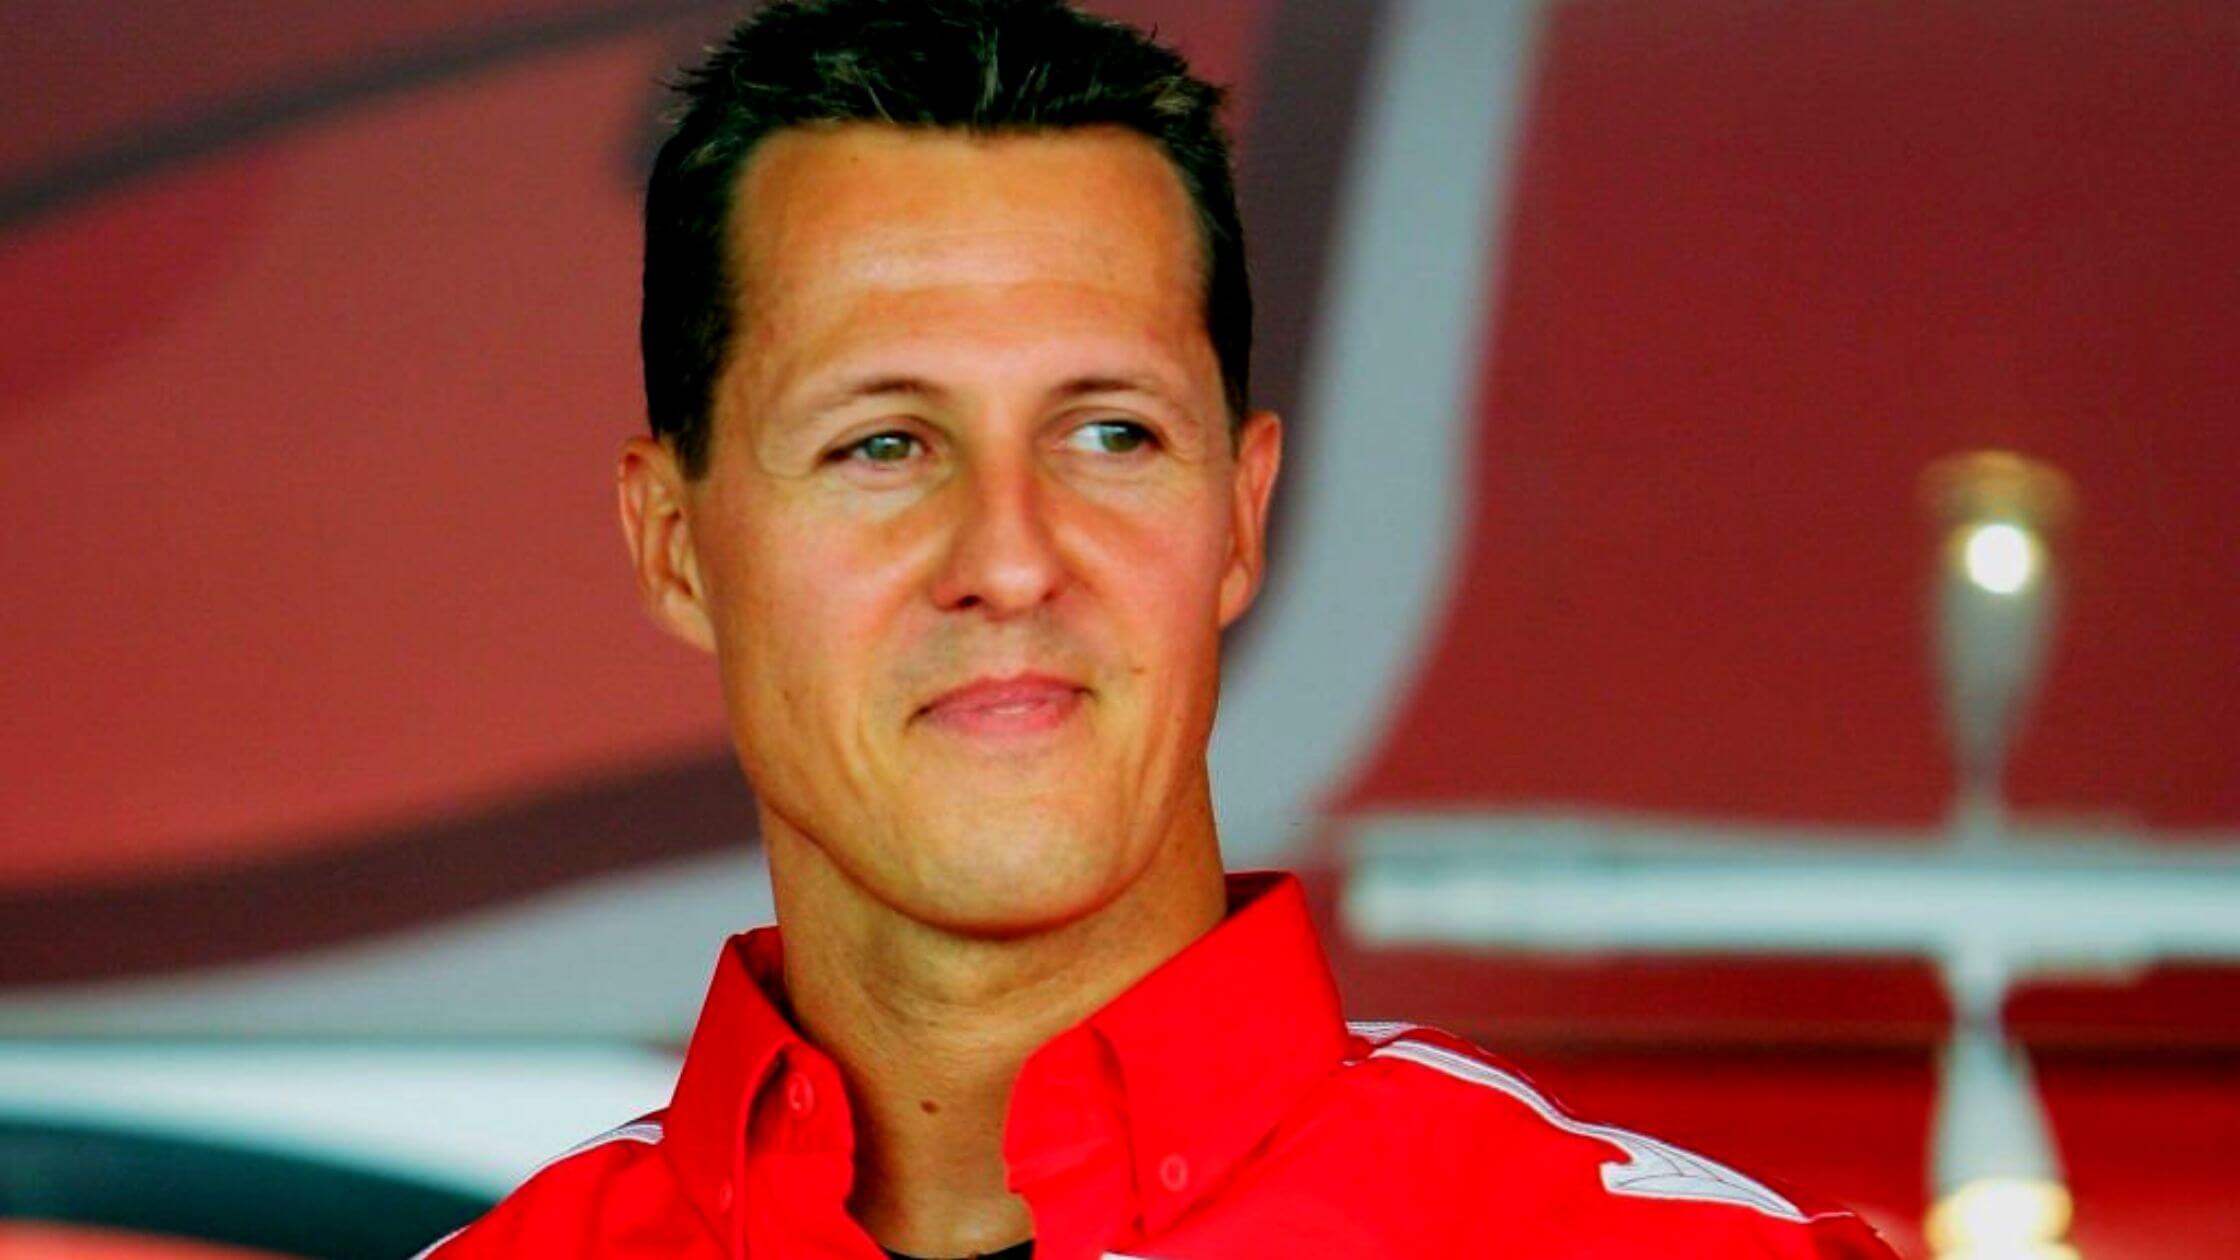 'Keep Fighting,' Michael Schumacher's Daughter Posted On His Birthday After The Racer's Accident